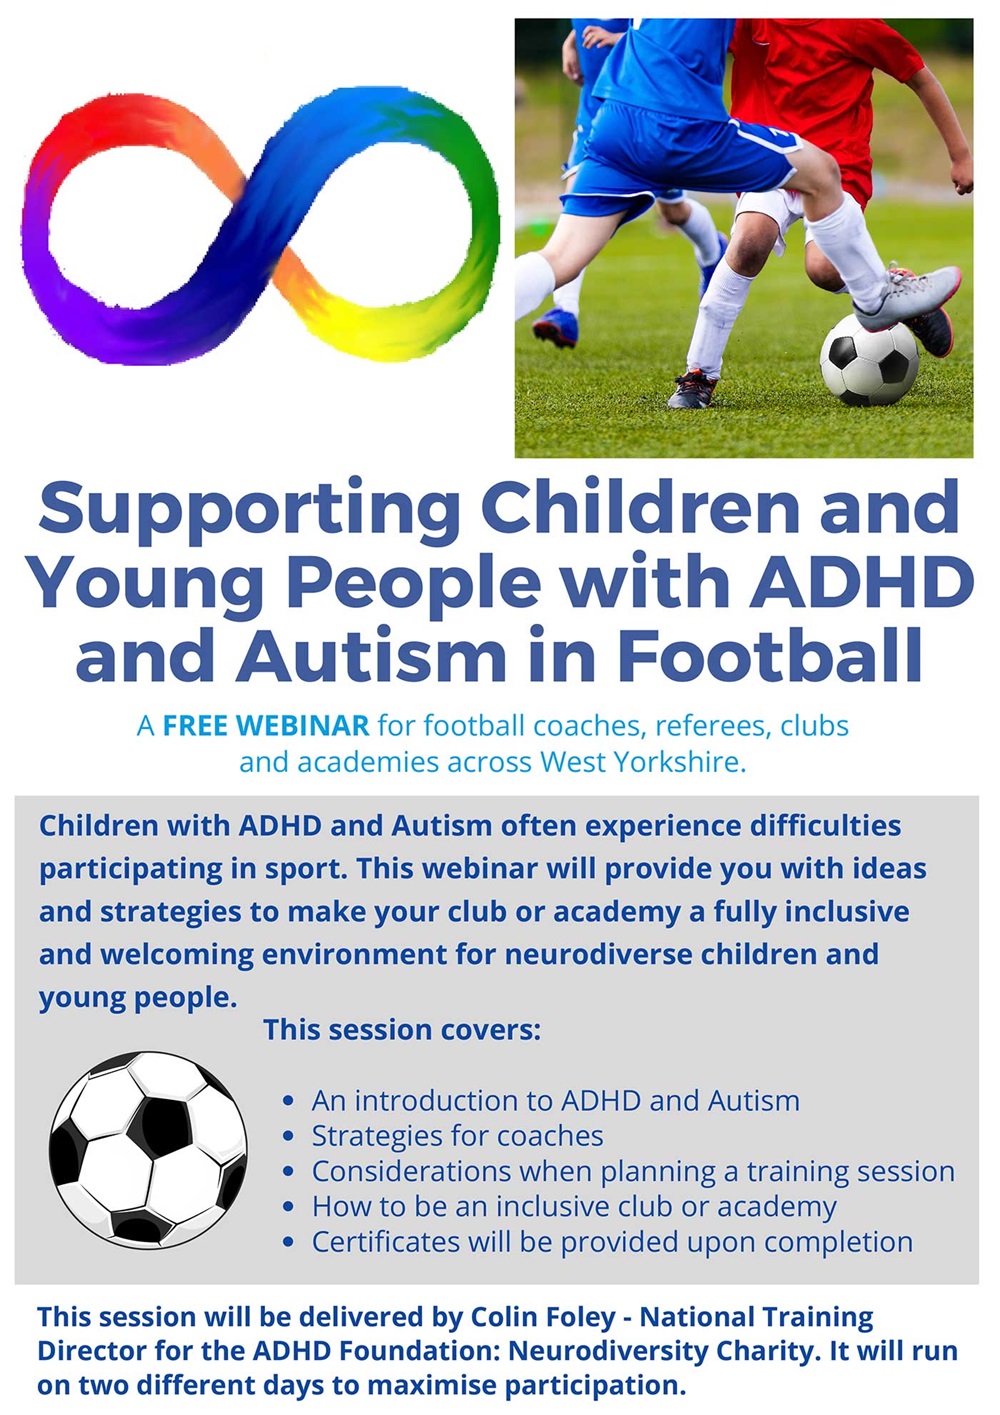 Autism support poster